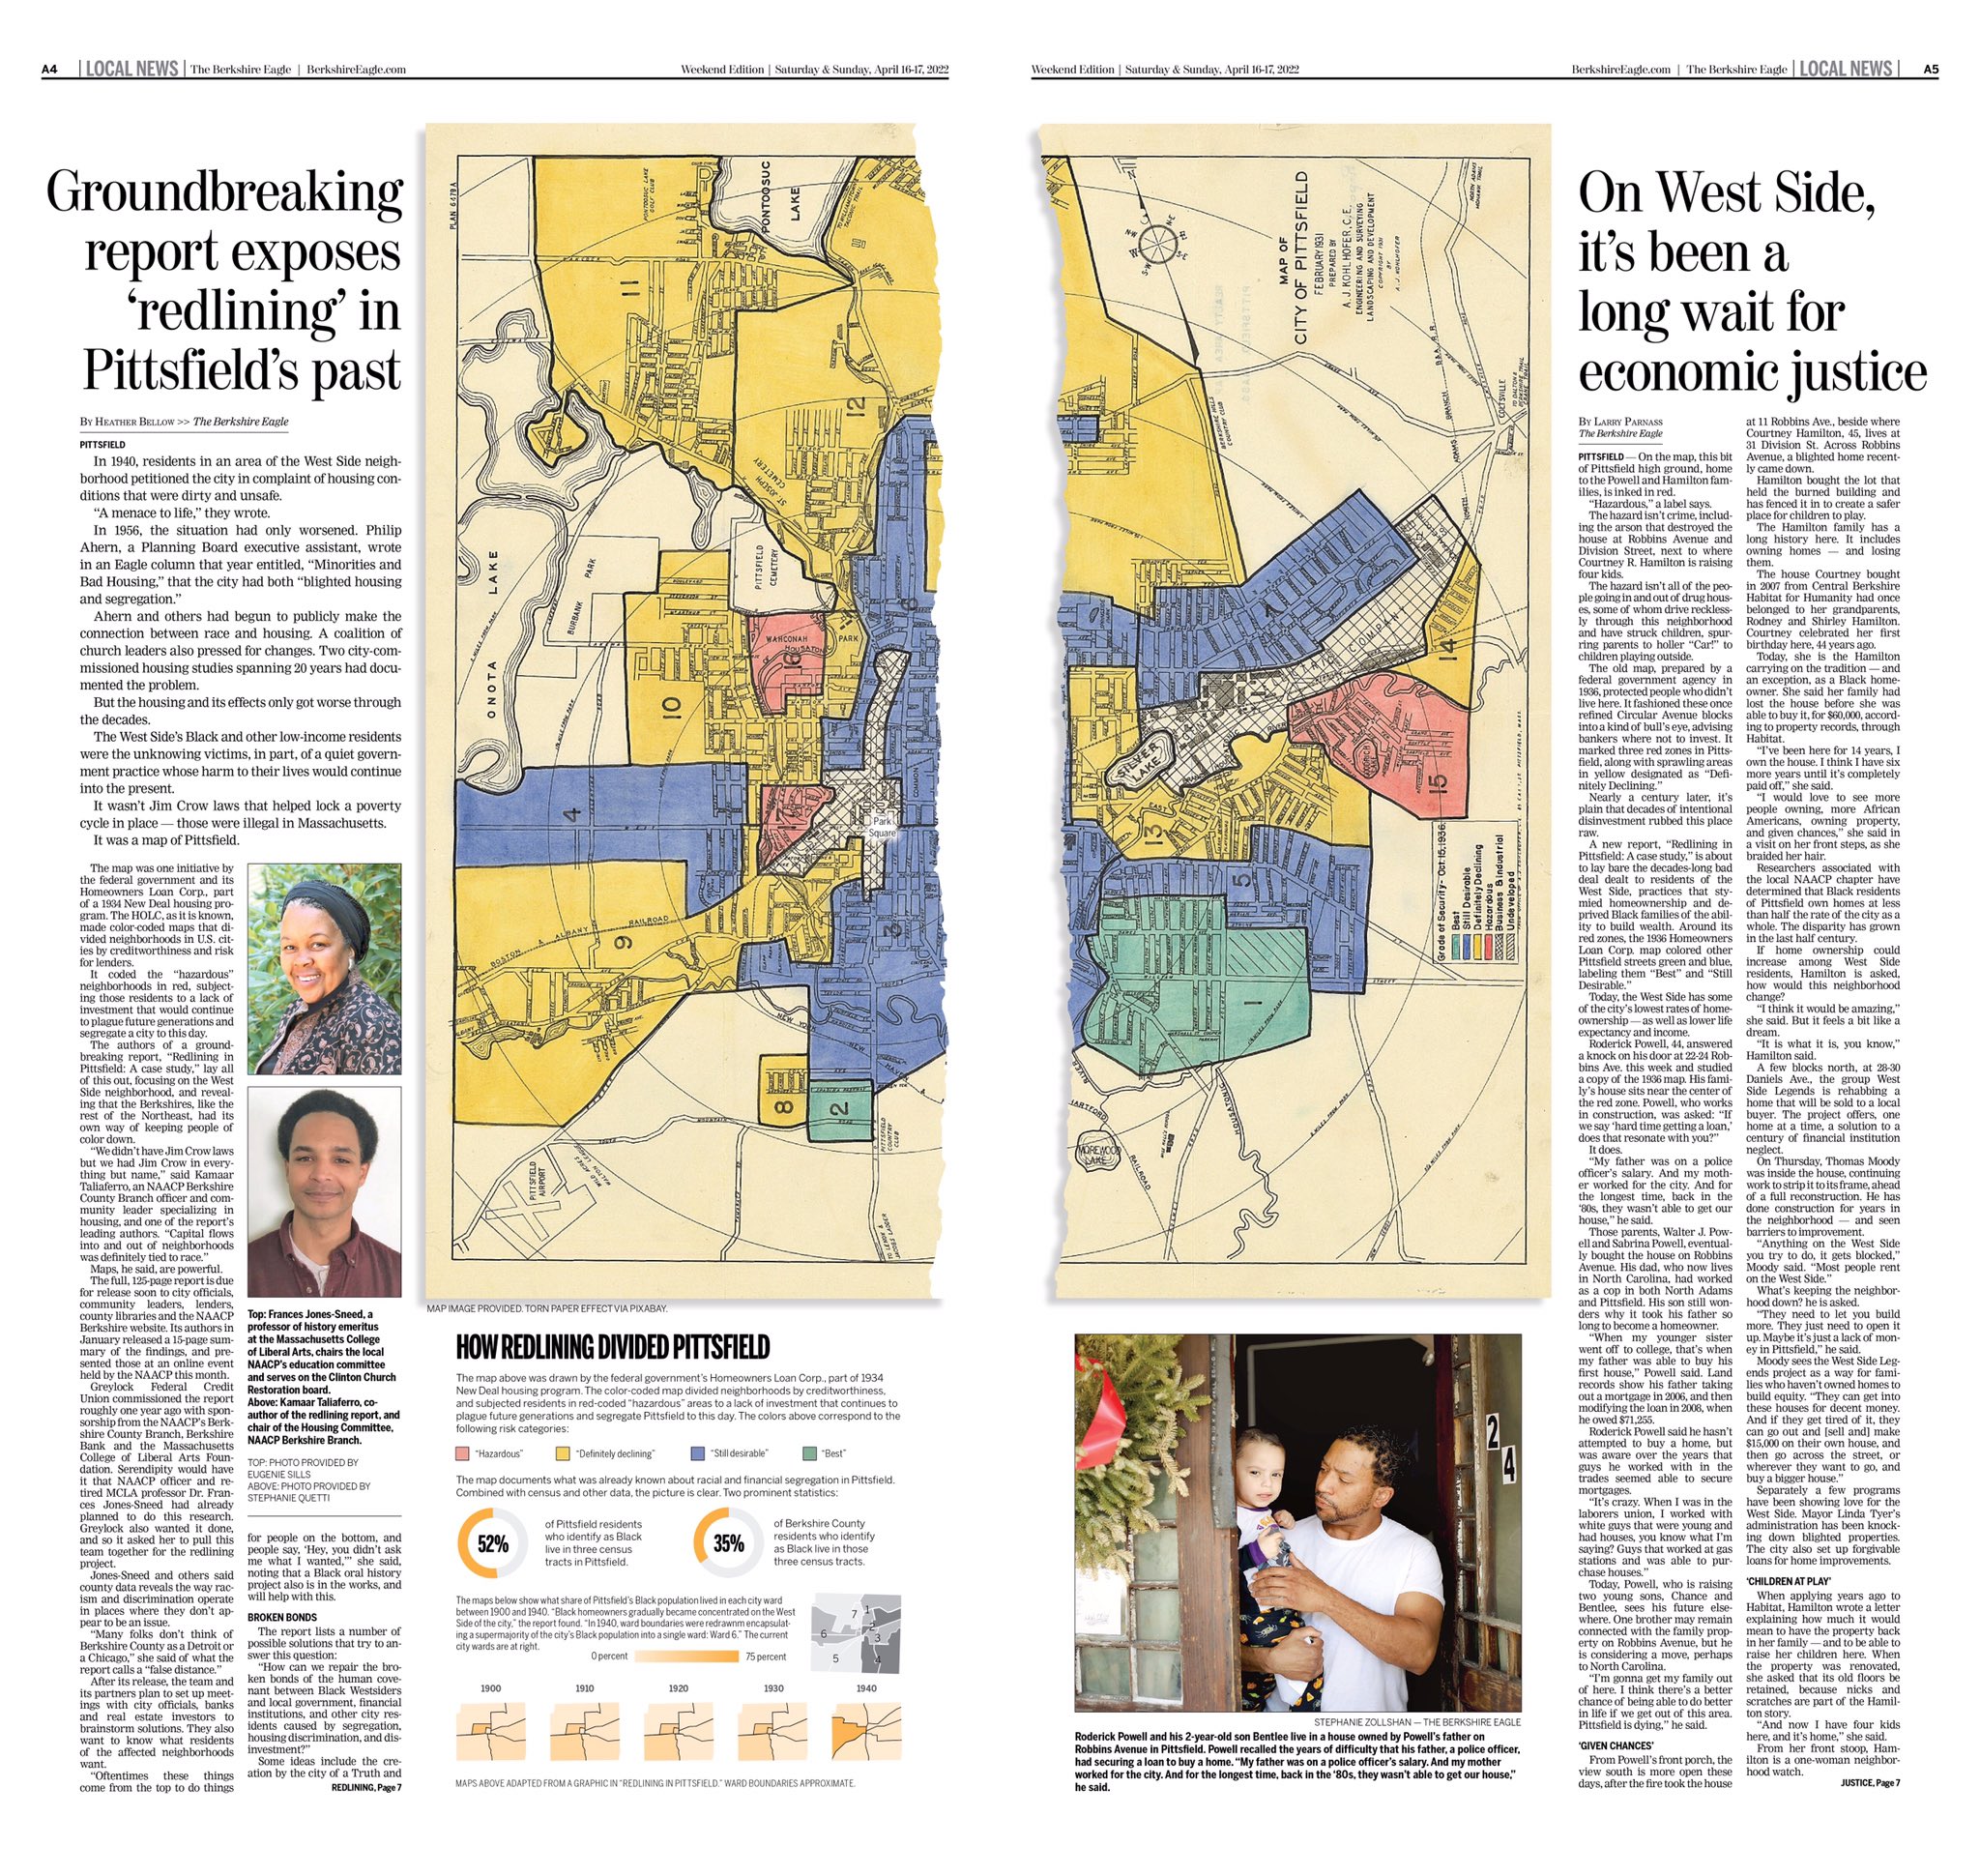 A newspaper spread featuring two stories about redlining in Pittsfield, as well as imagery and graphics.